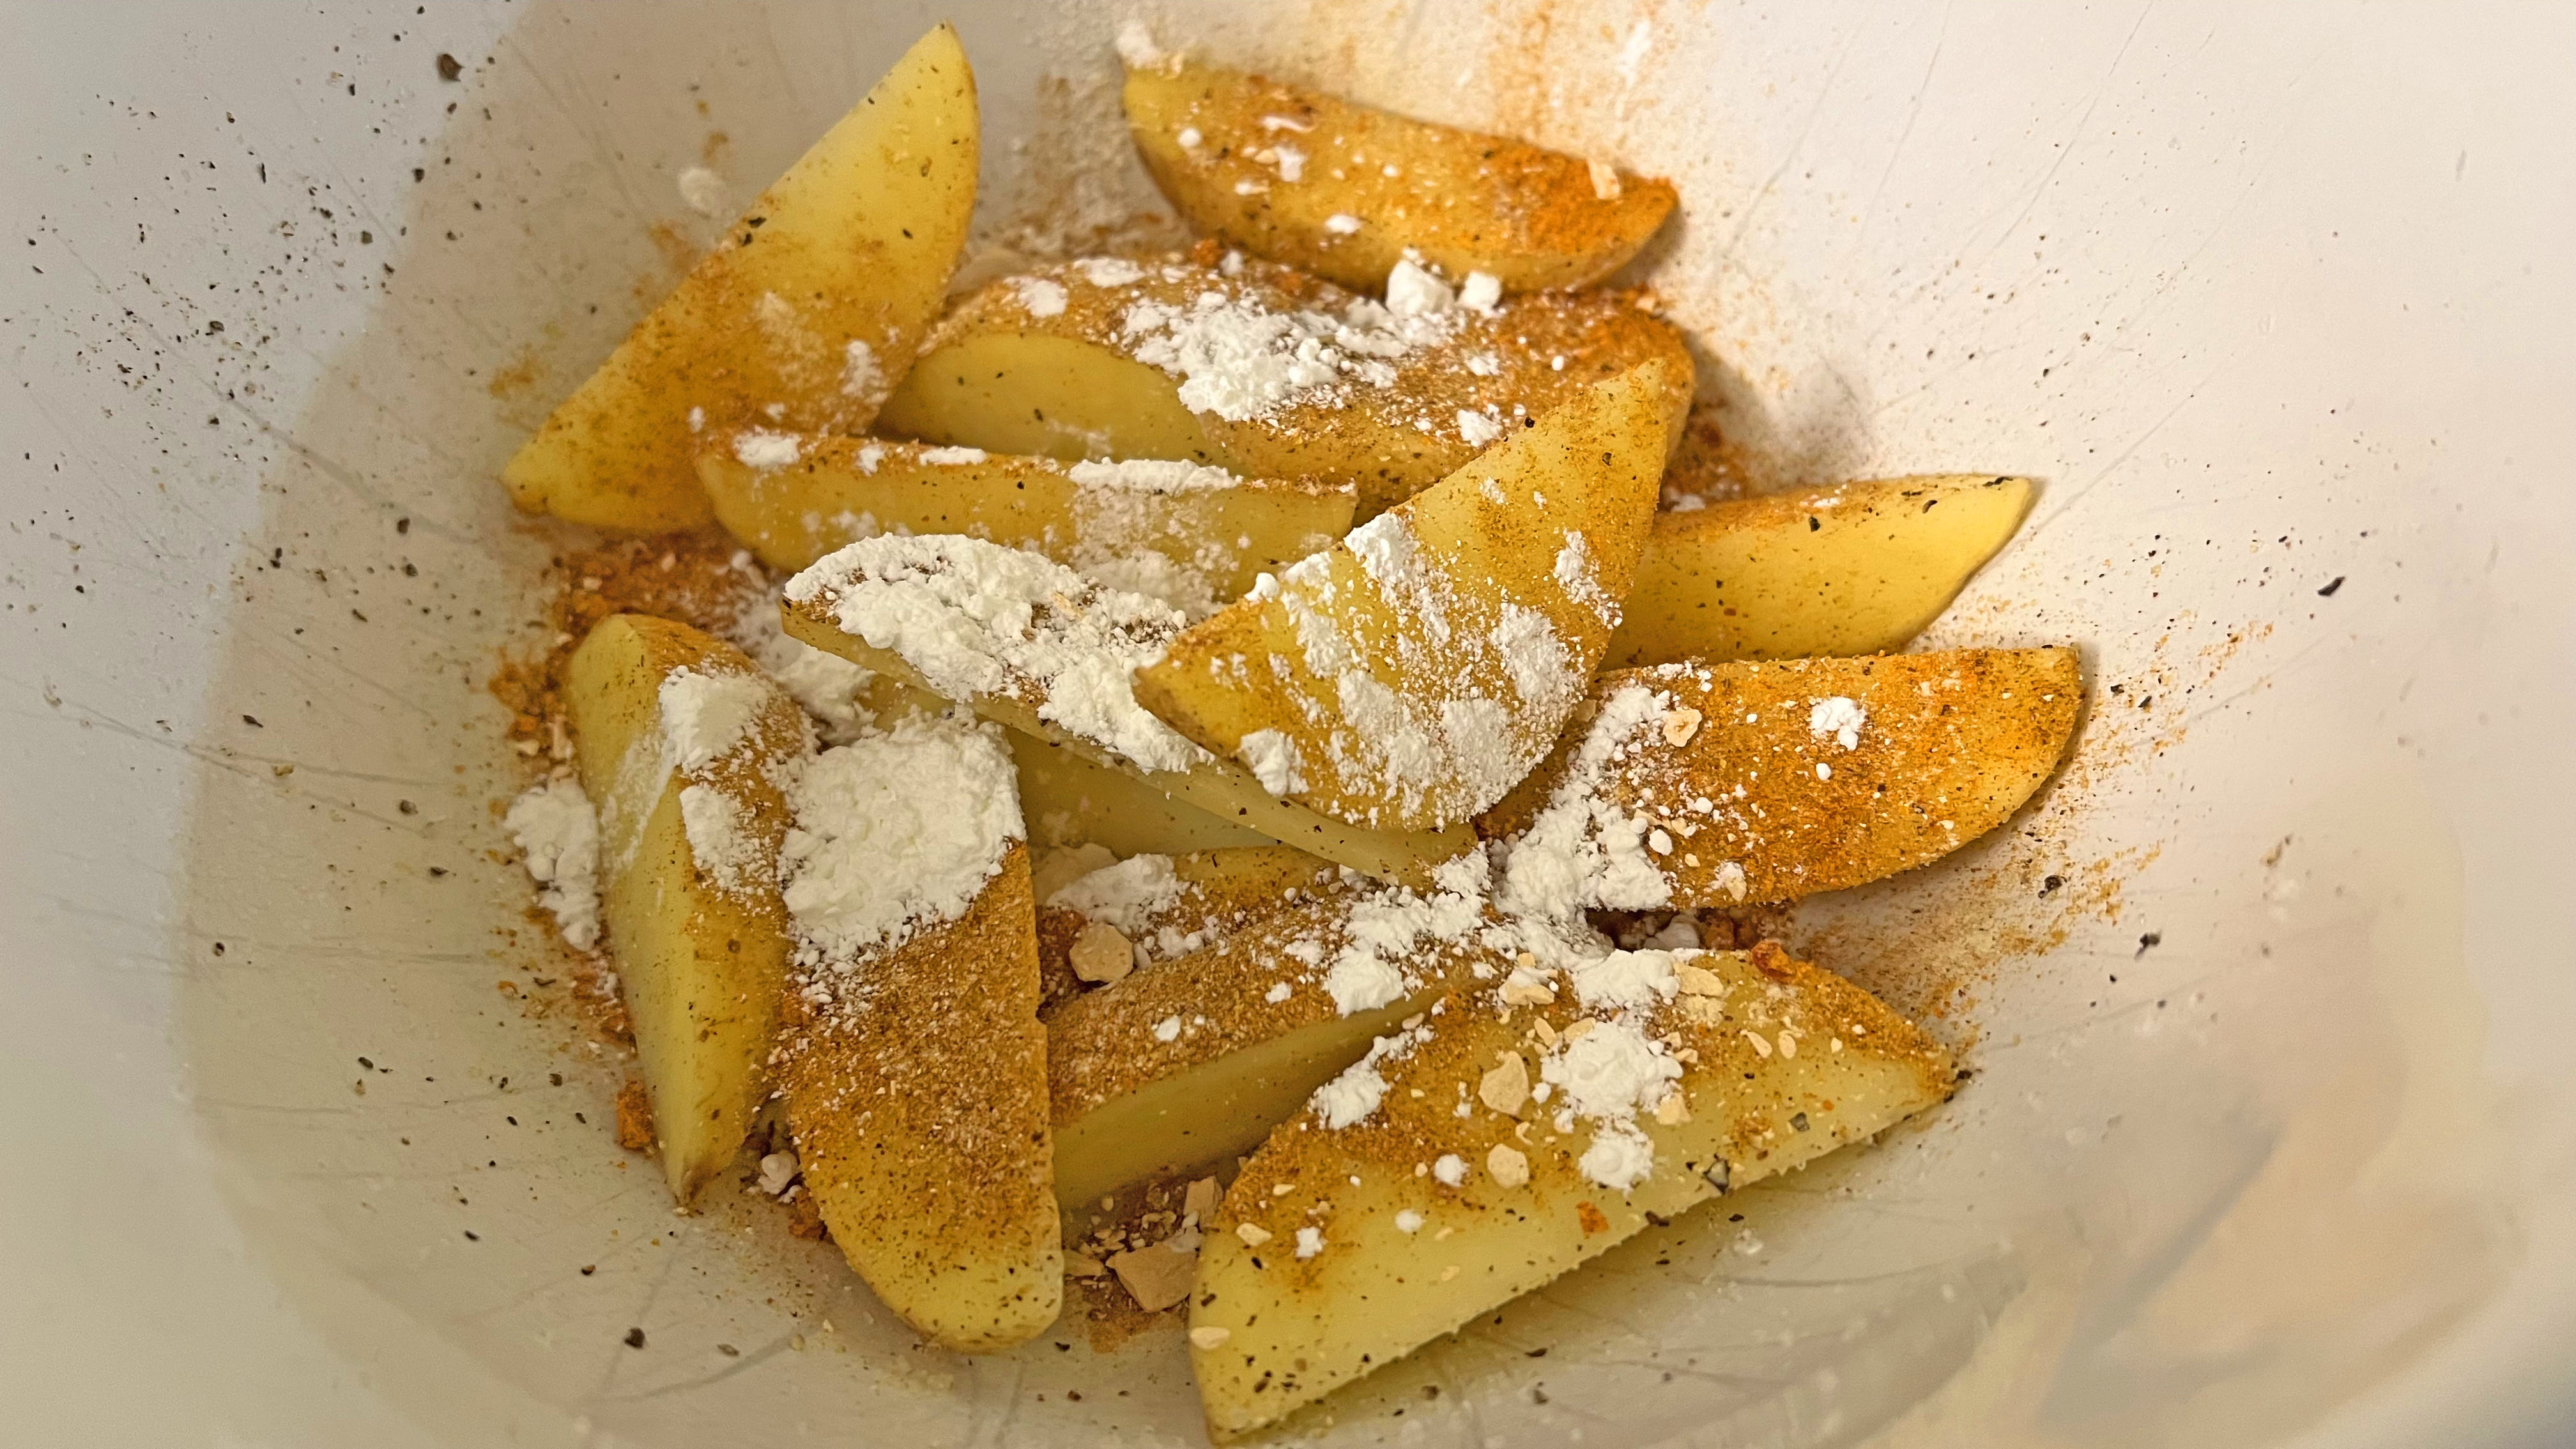 potato wedges in a bowl with cornstarch, salt pepper and paprika seasoning